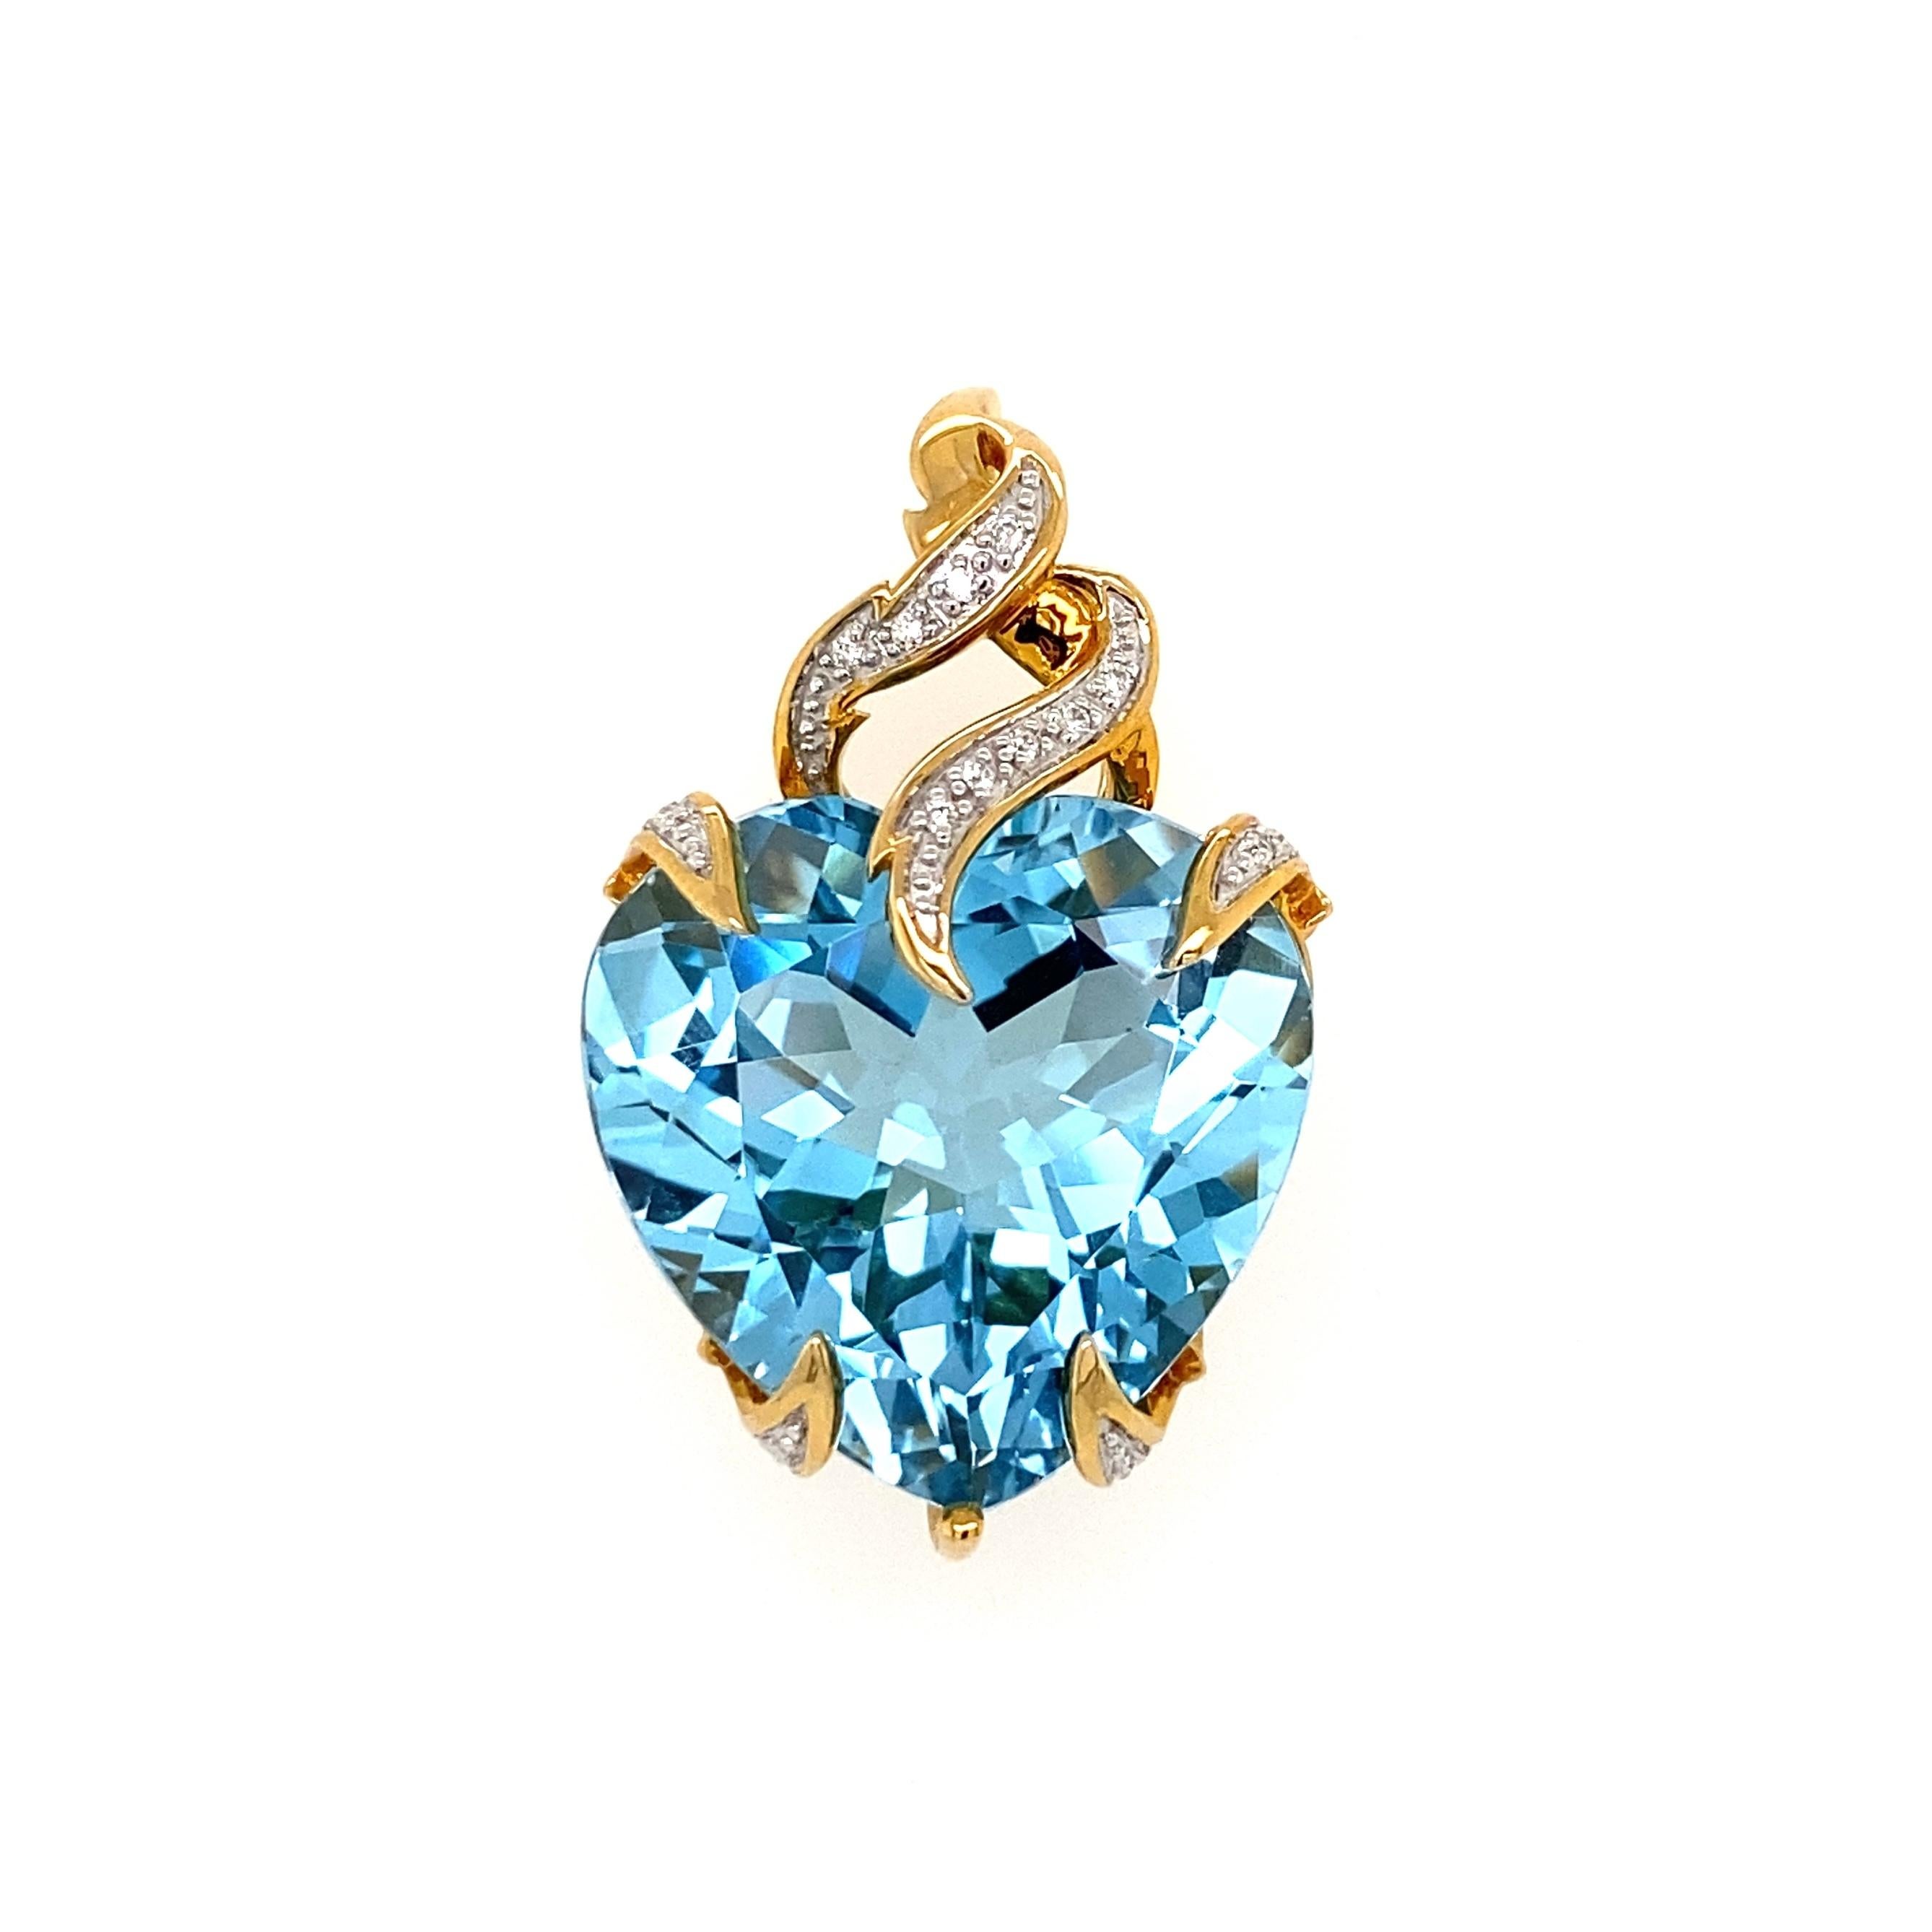 Simply Beautiful! Finely Detailed Gemstone Blue Topaz Heart and Diamond Gold Pendant. Centering a Hand set 15 Carat Heart shaped Topaz, approx. 1.25” long, accented by Diamonds, approx. 0.21tcw. Hand crafted in 14K Yellow Gold. More Beautiful in